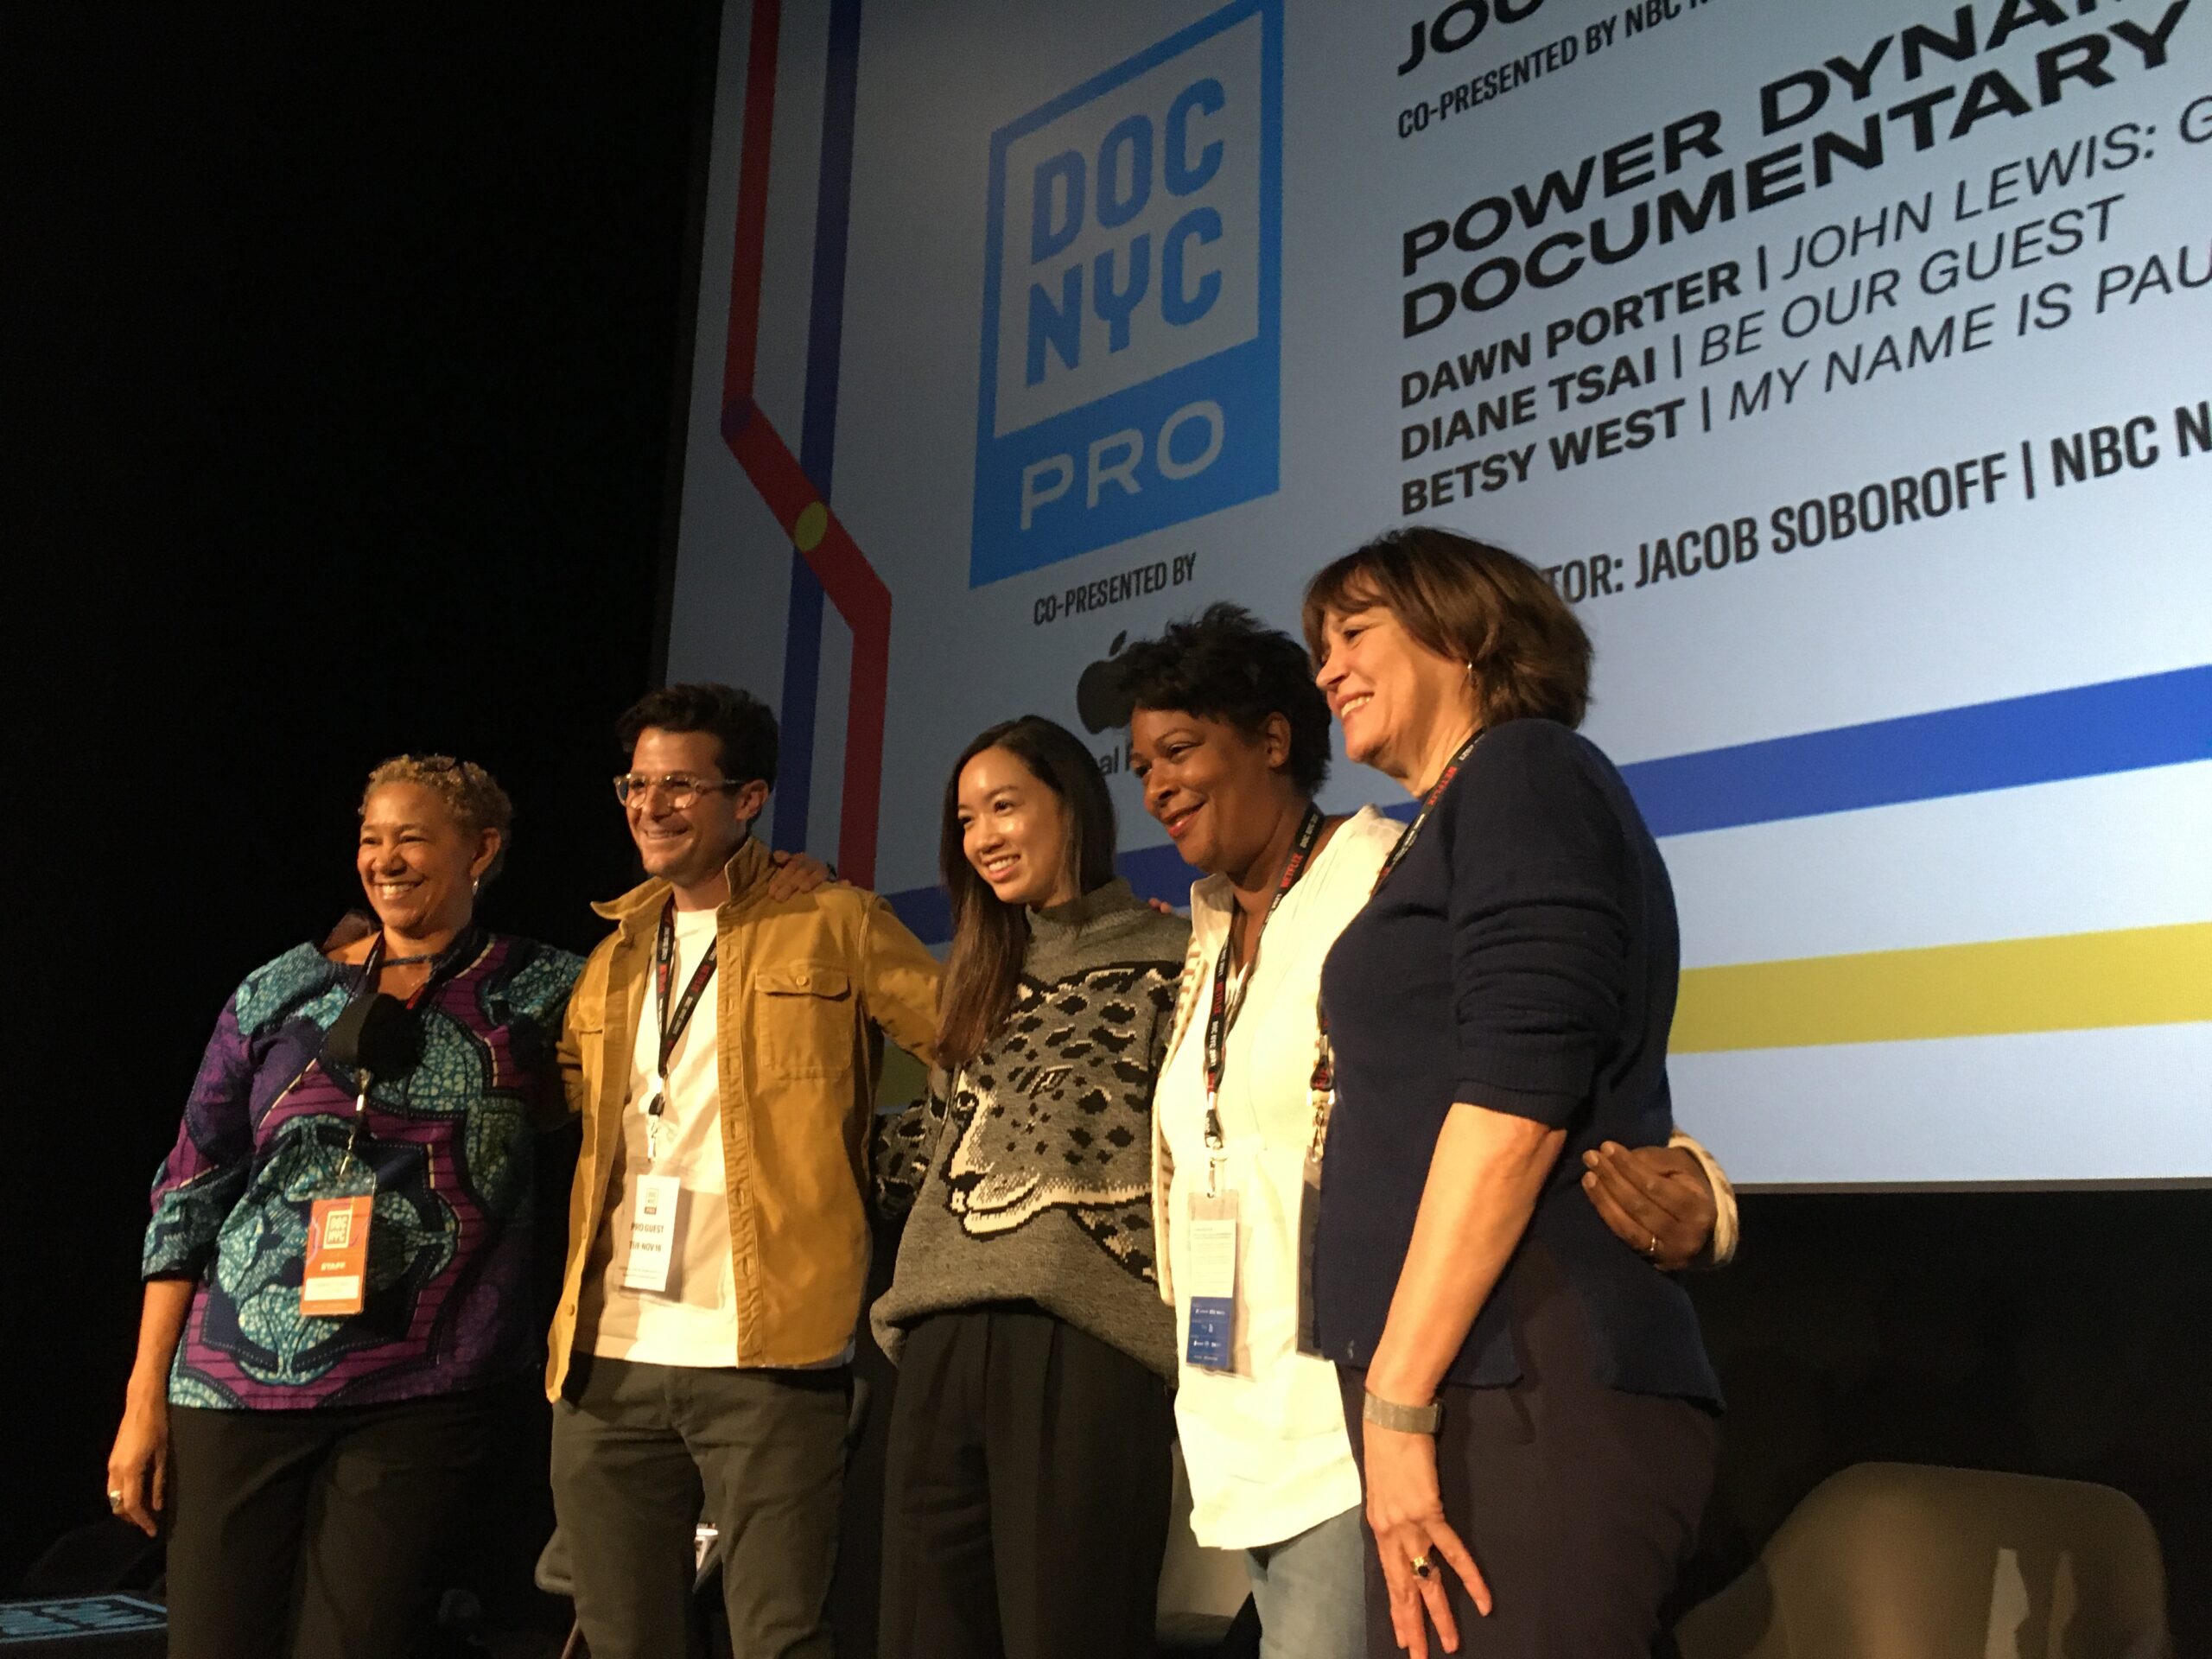 DOC NYC PRO conference for documentary filmmakers